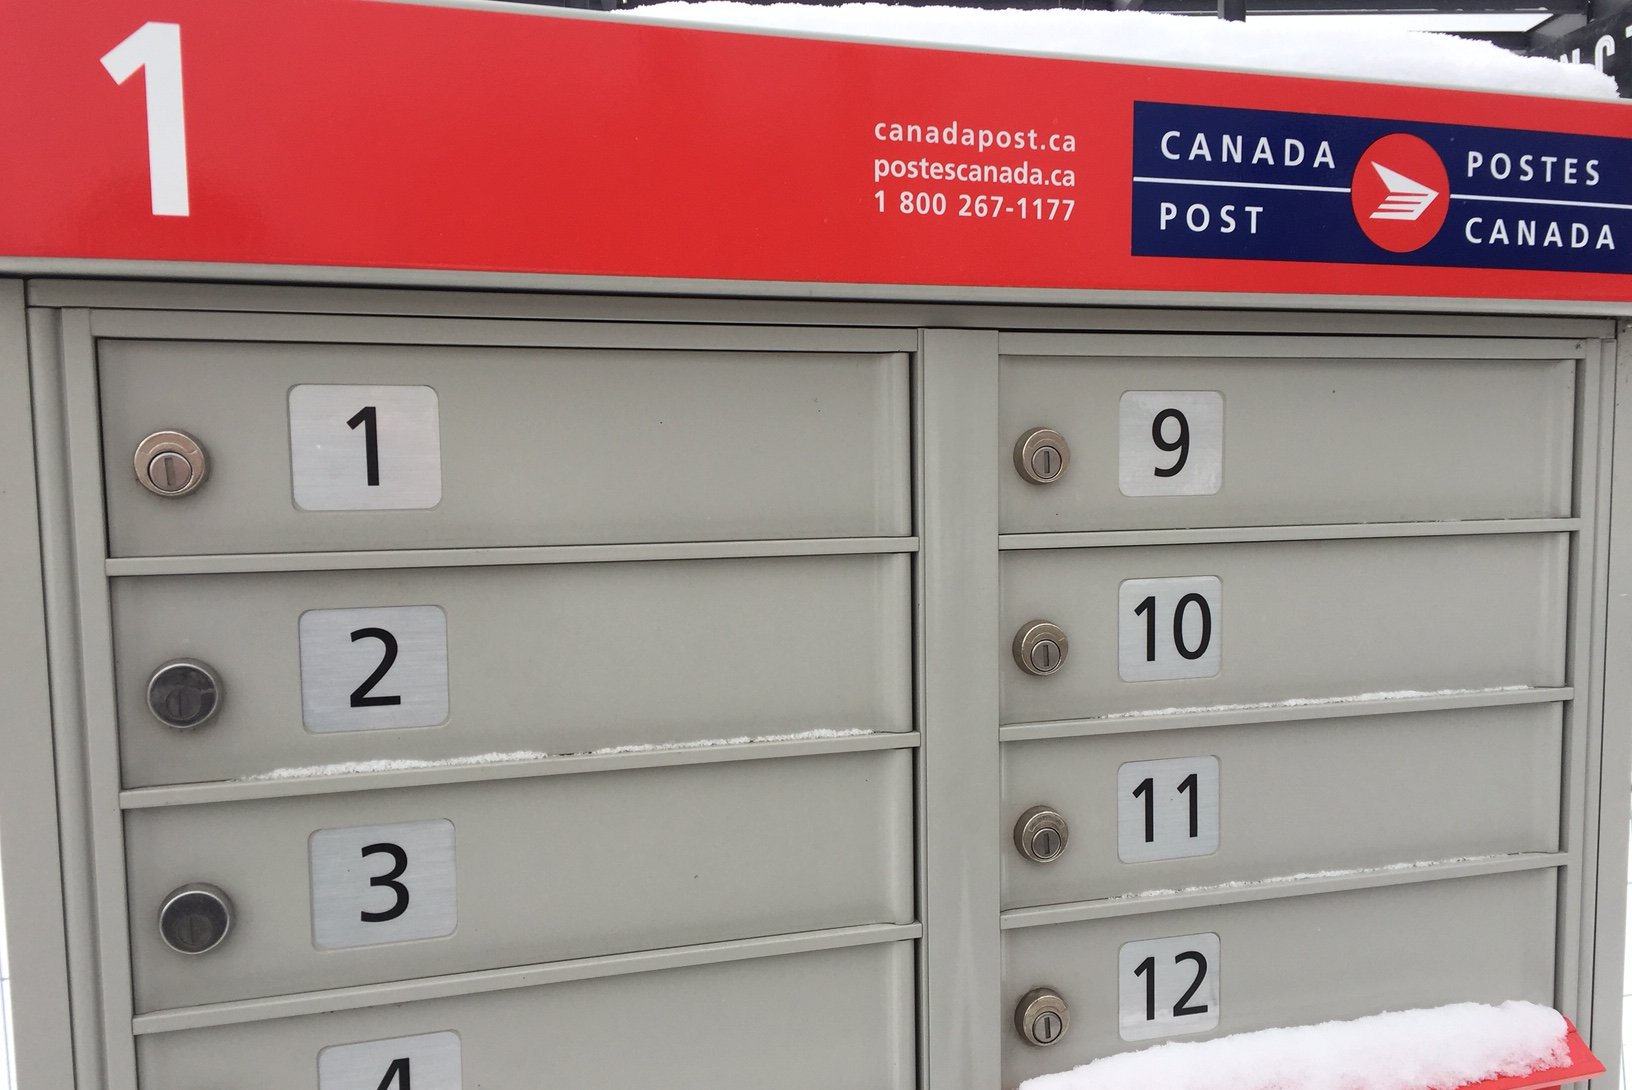 Canada Post is being affected by the weather conditions, which is impeding mail delivery in southern Saskatchewan, including Regina and Saskatoon.